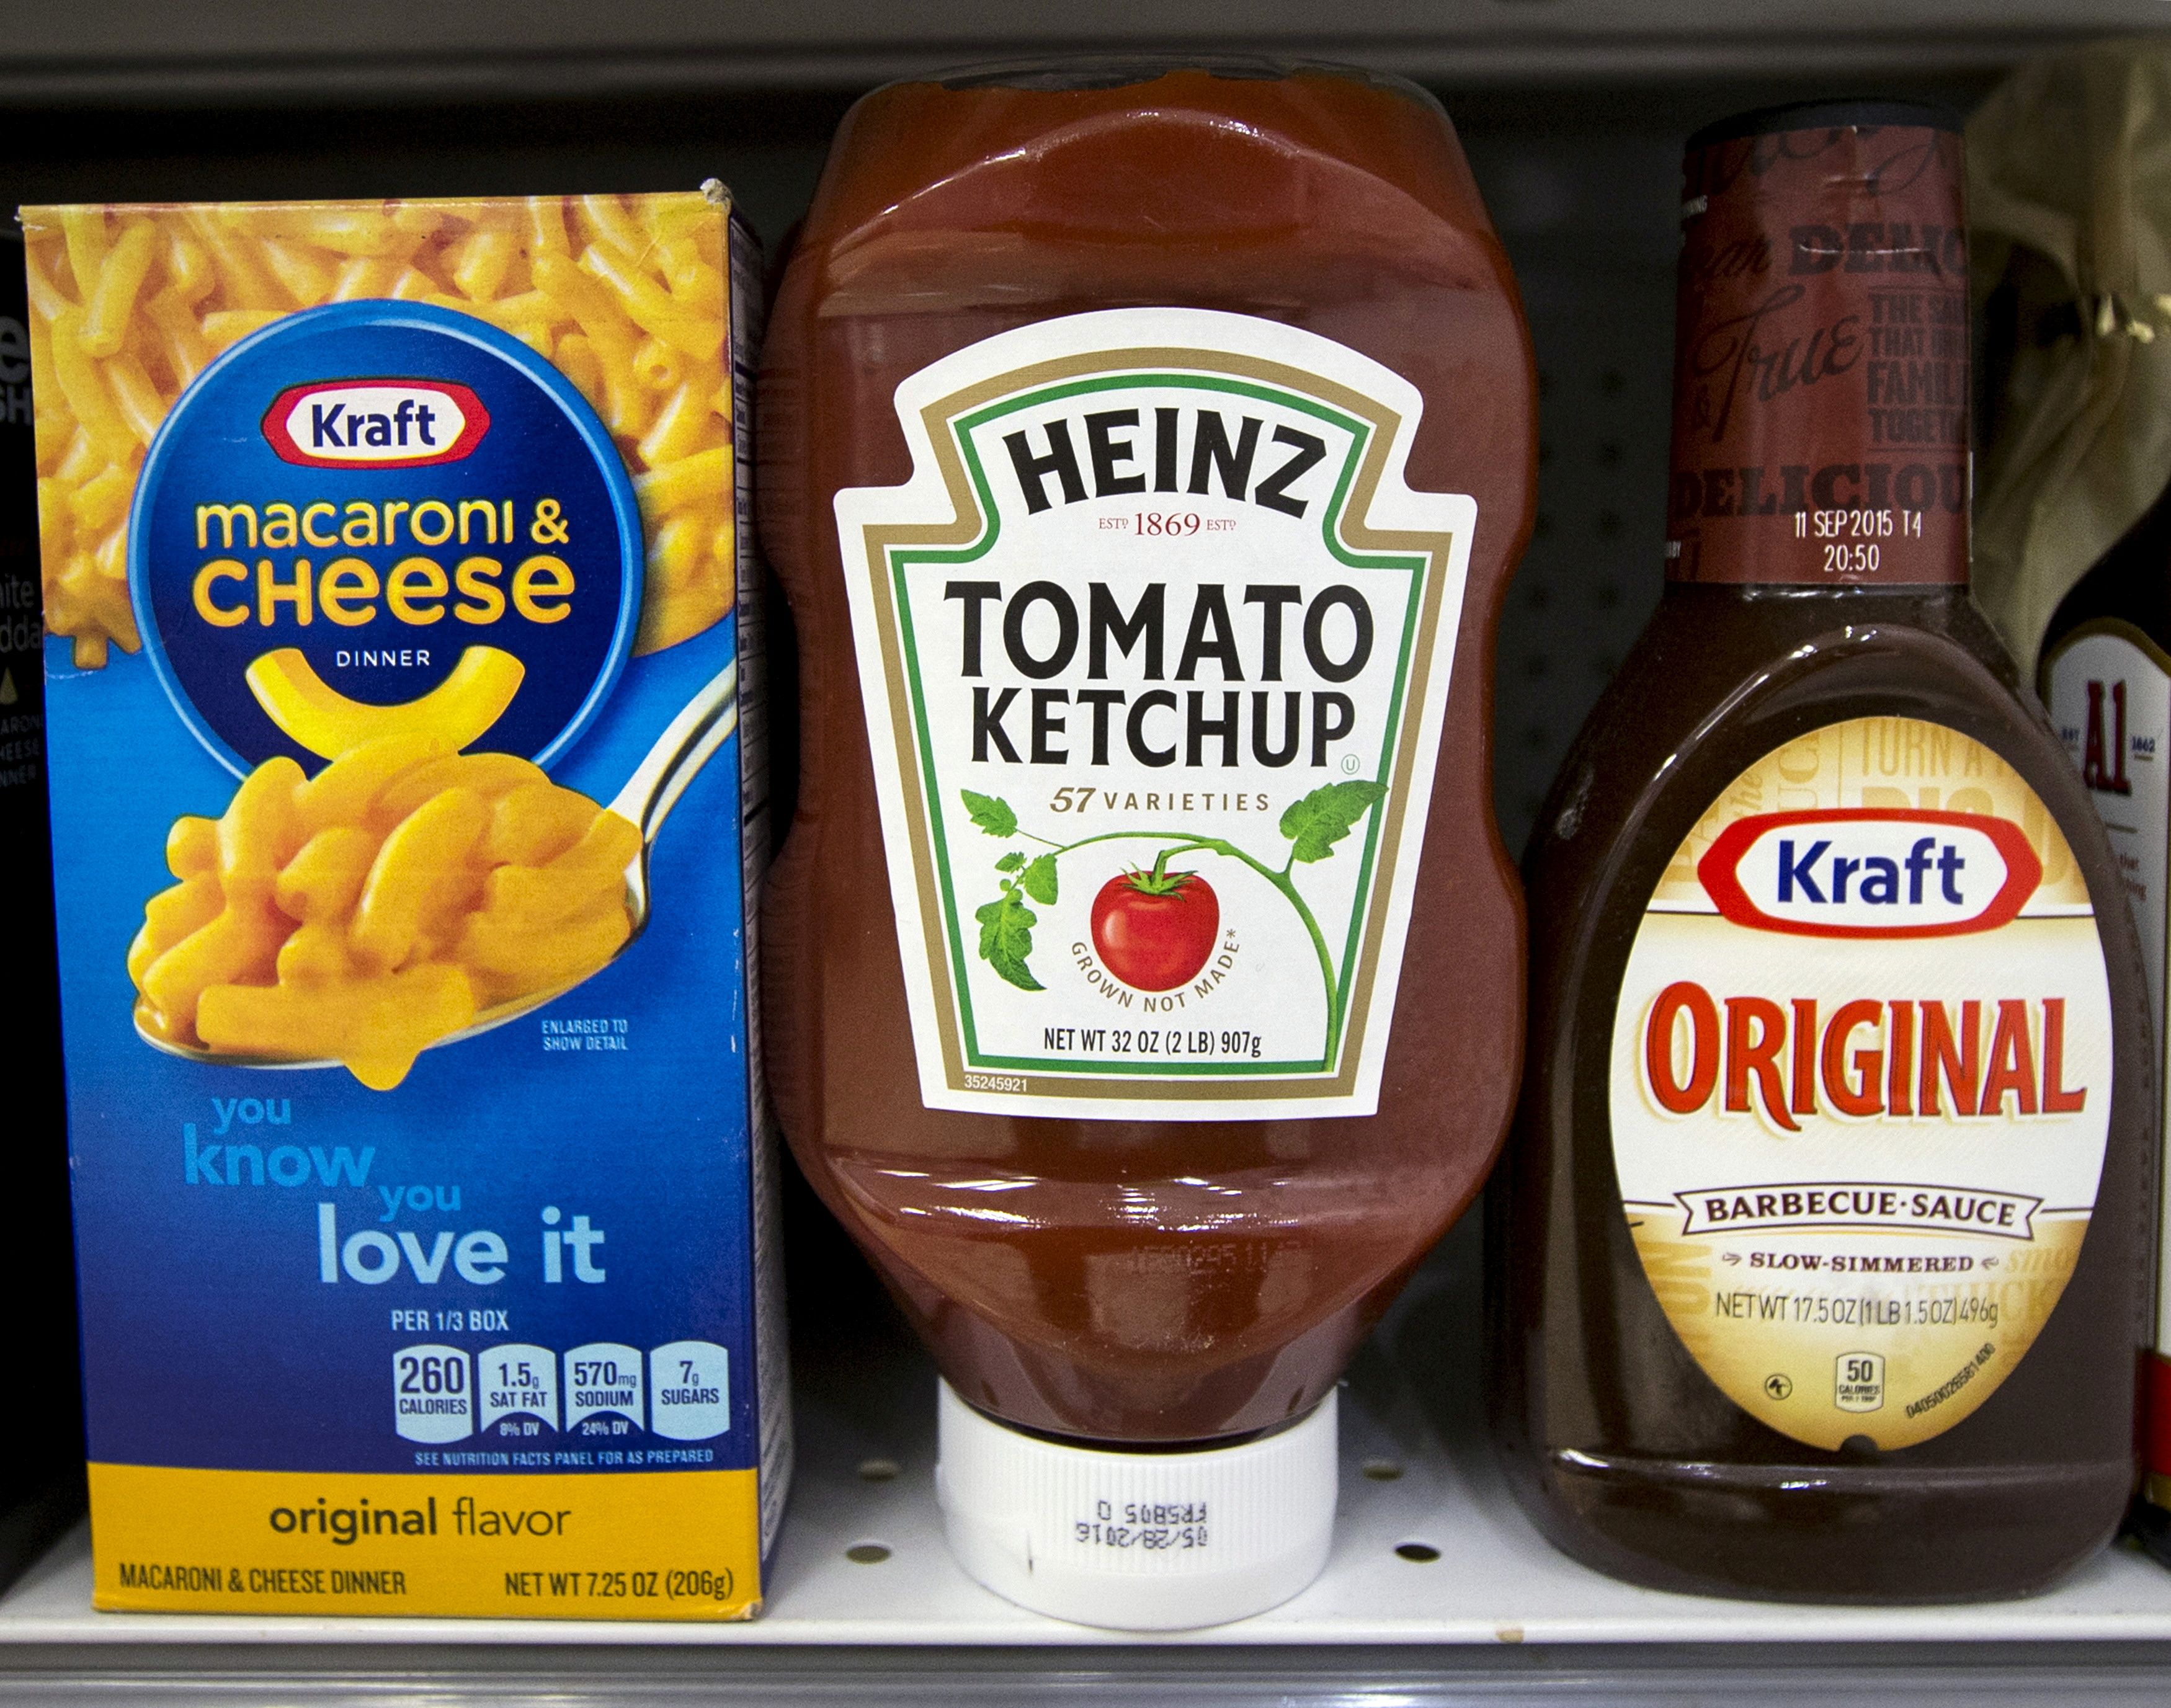 A Heinz Ketchup bottle sits between a box of Kraft macaroni and cheese and a bottle of Kraft Original Barbecue Sauce on a grocery store shelf in New York March 25, 2015.  REUTERS/Brendan McDermid/File Photo